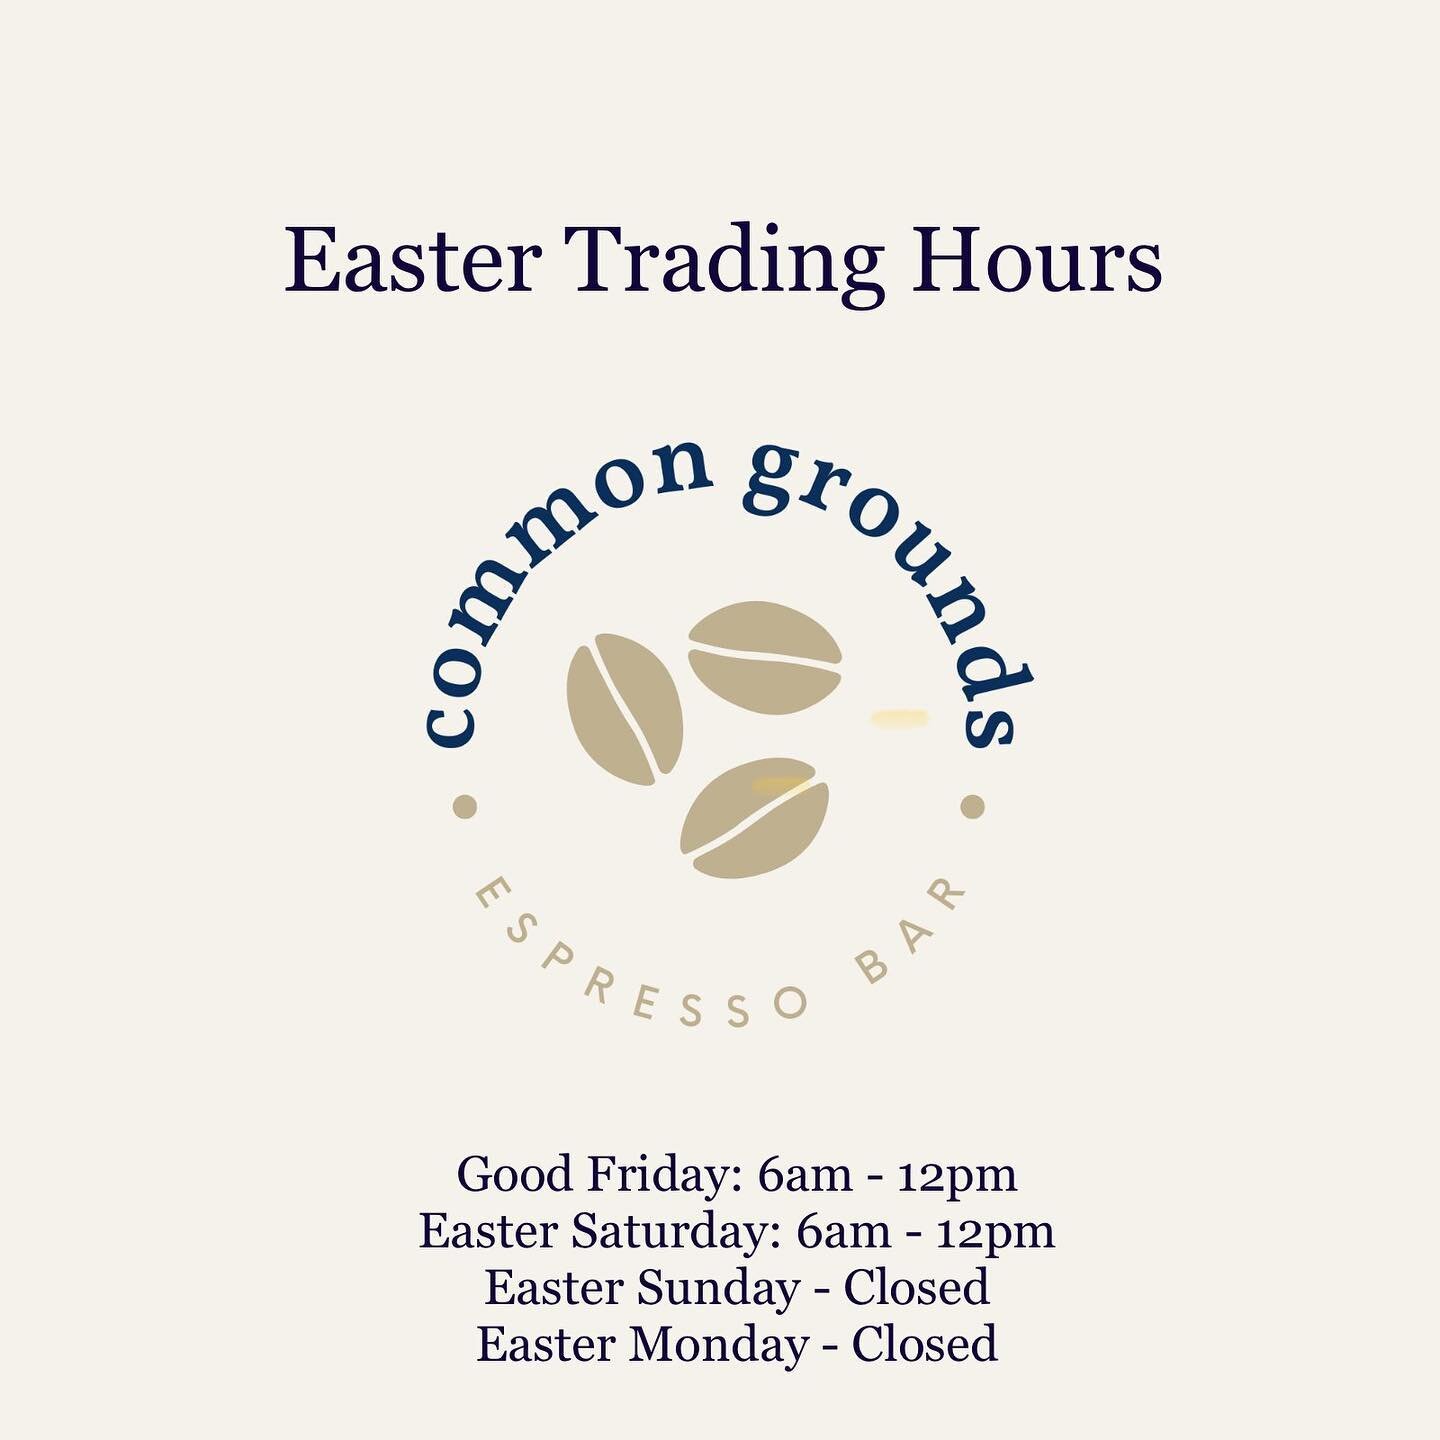 🐣🐰🐰We will be open on Good Friday and Easter Saturday to make sure you are caffeinated for the Big Day&hellip;&hellip;.. 6 sleeps until the easter bunny arrives 🐰🐰💙 
#coffee #gymea #sutherlandshirebusiness #sutherlandshire #easterhours🐥